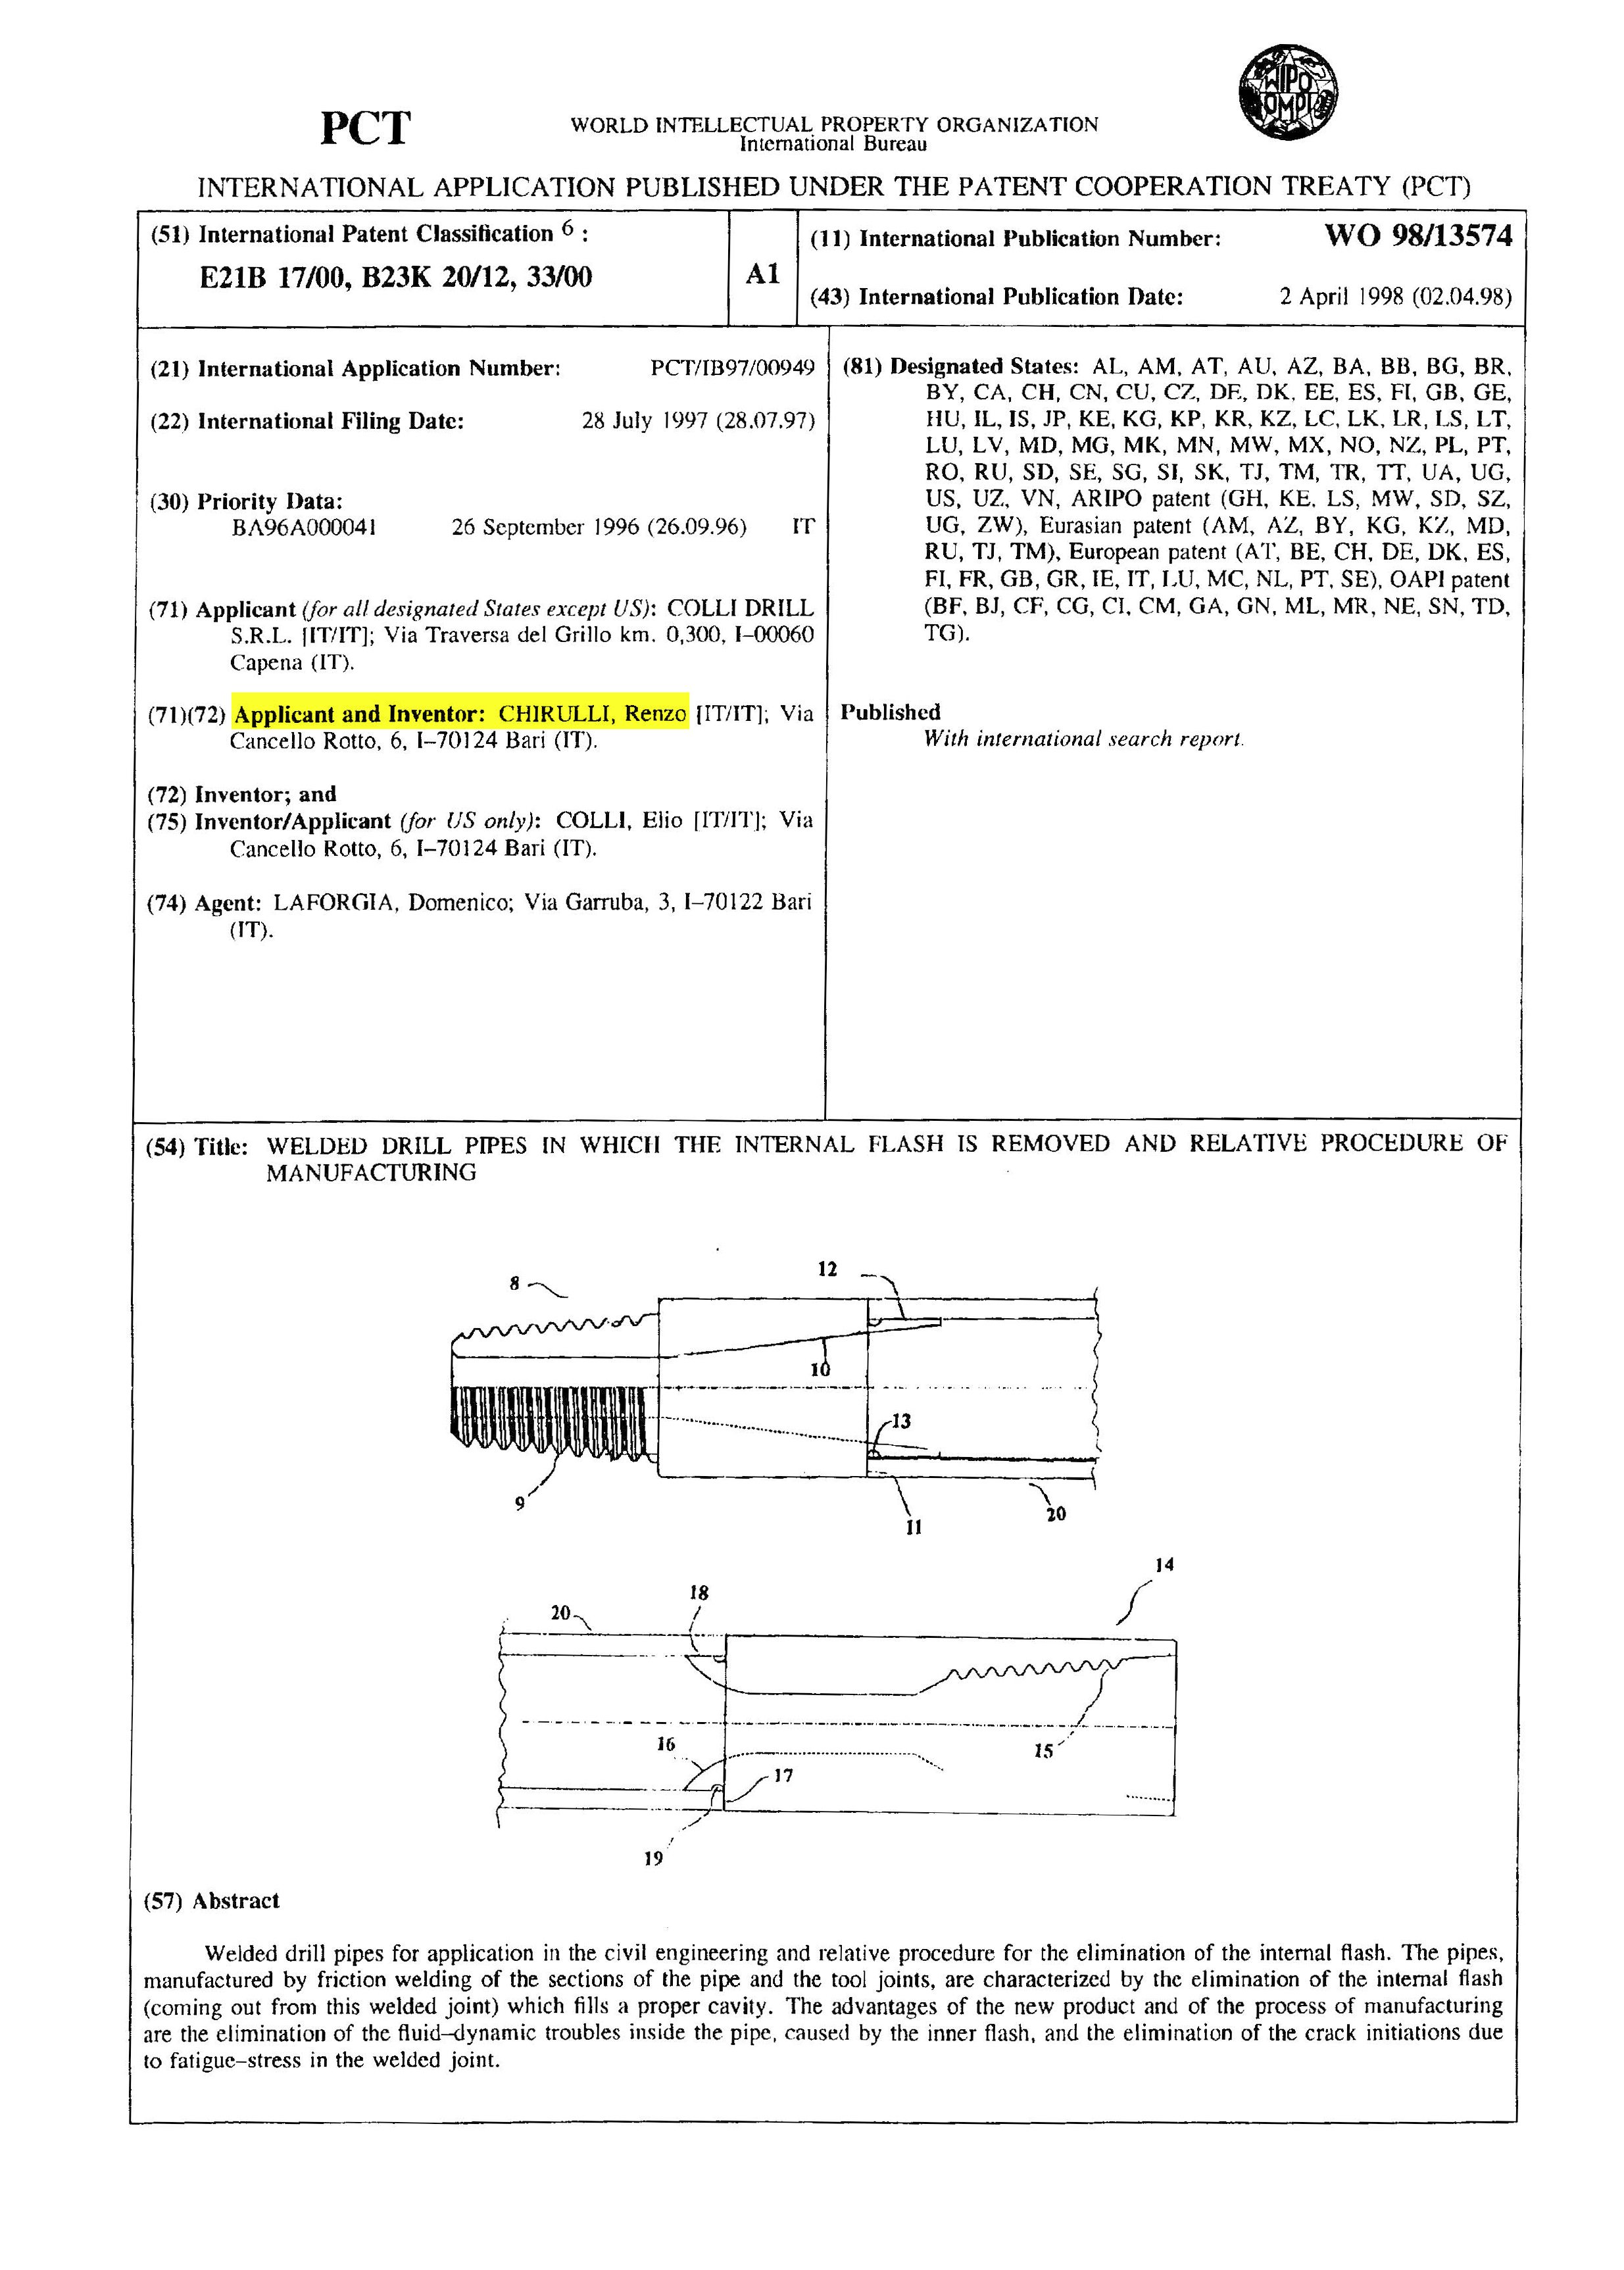 Copy of the international patent (PCT) for drill pipes with internal flash encasement.